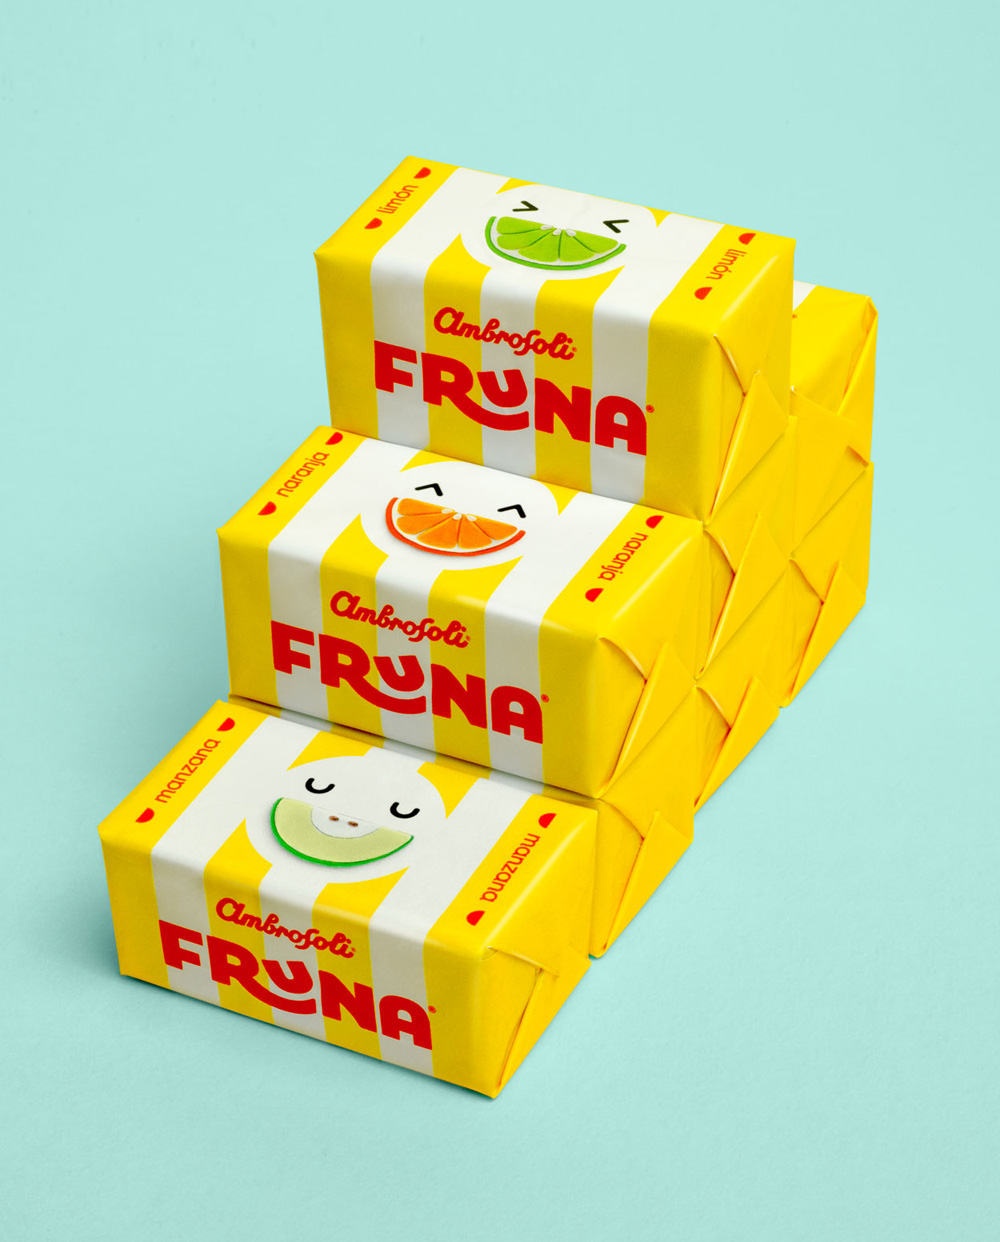 New Logo and Packaging for Fruna by Brandlab